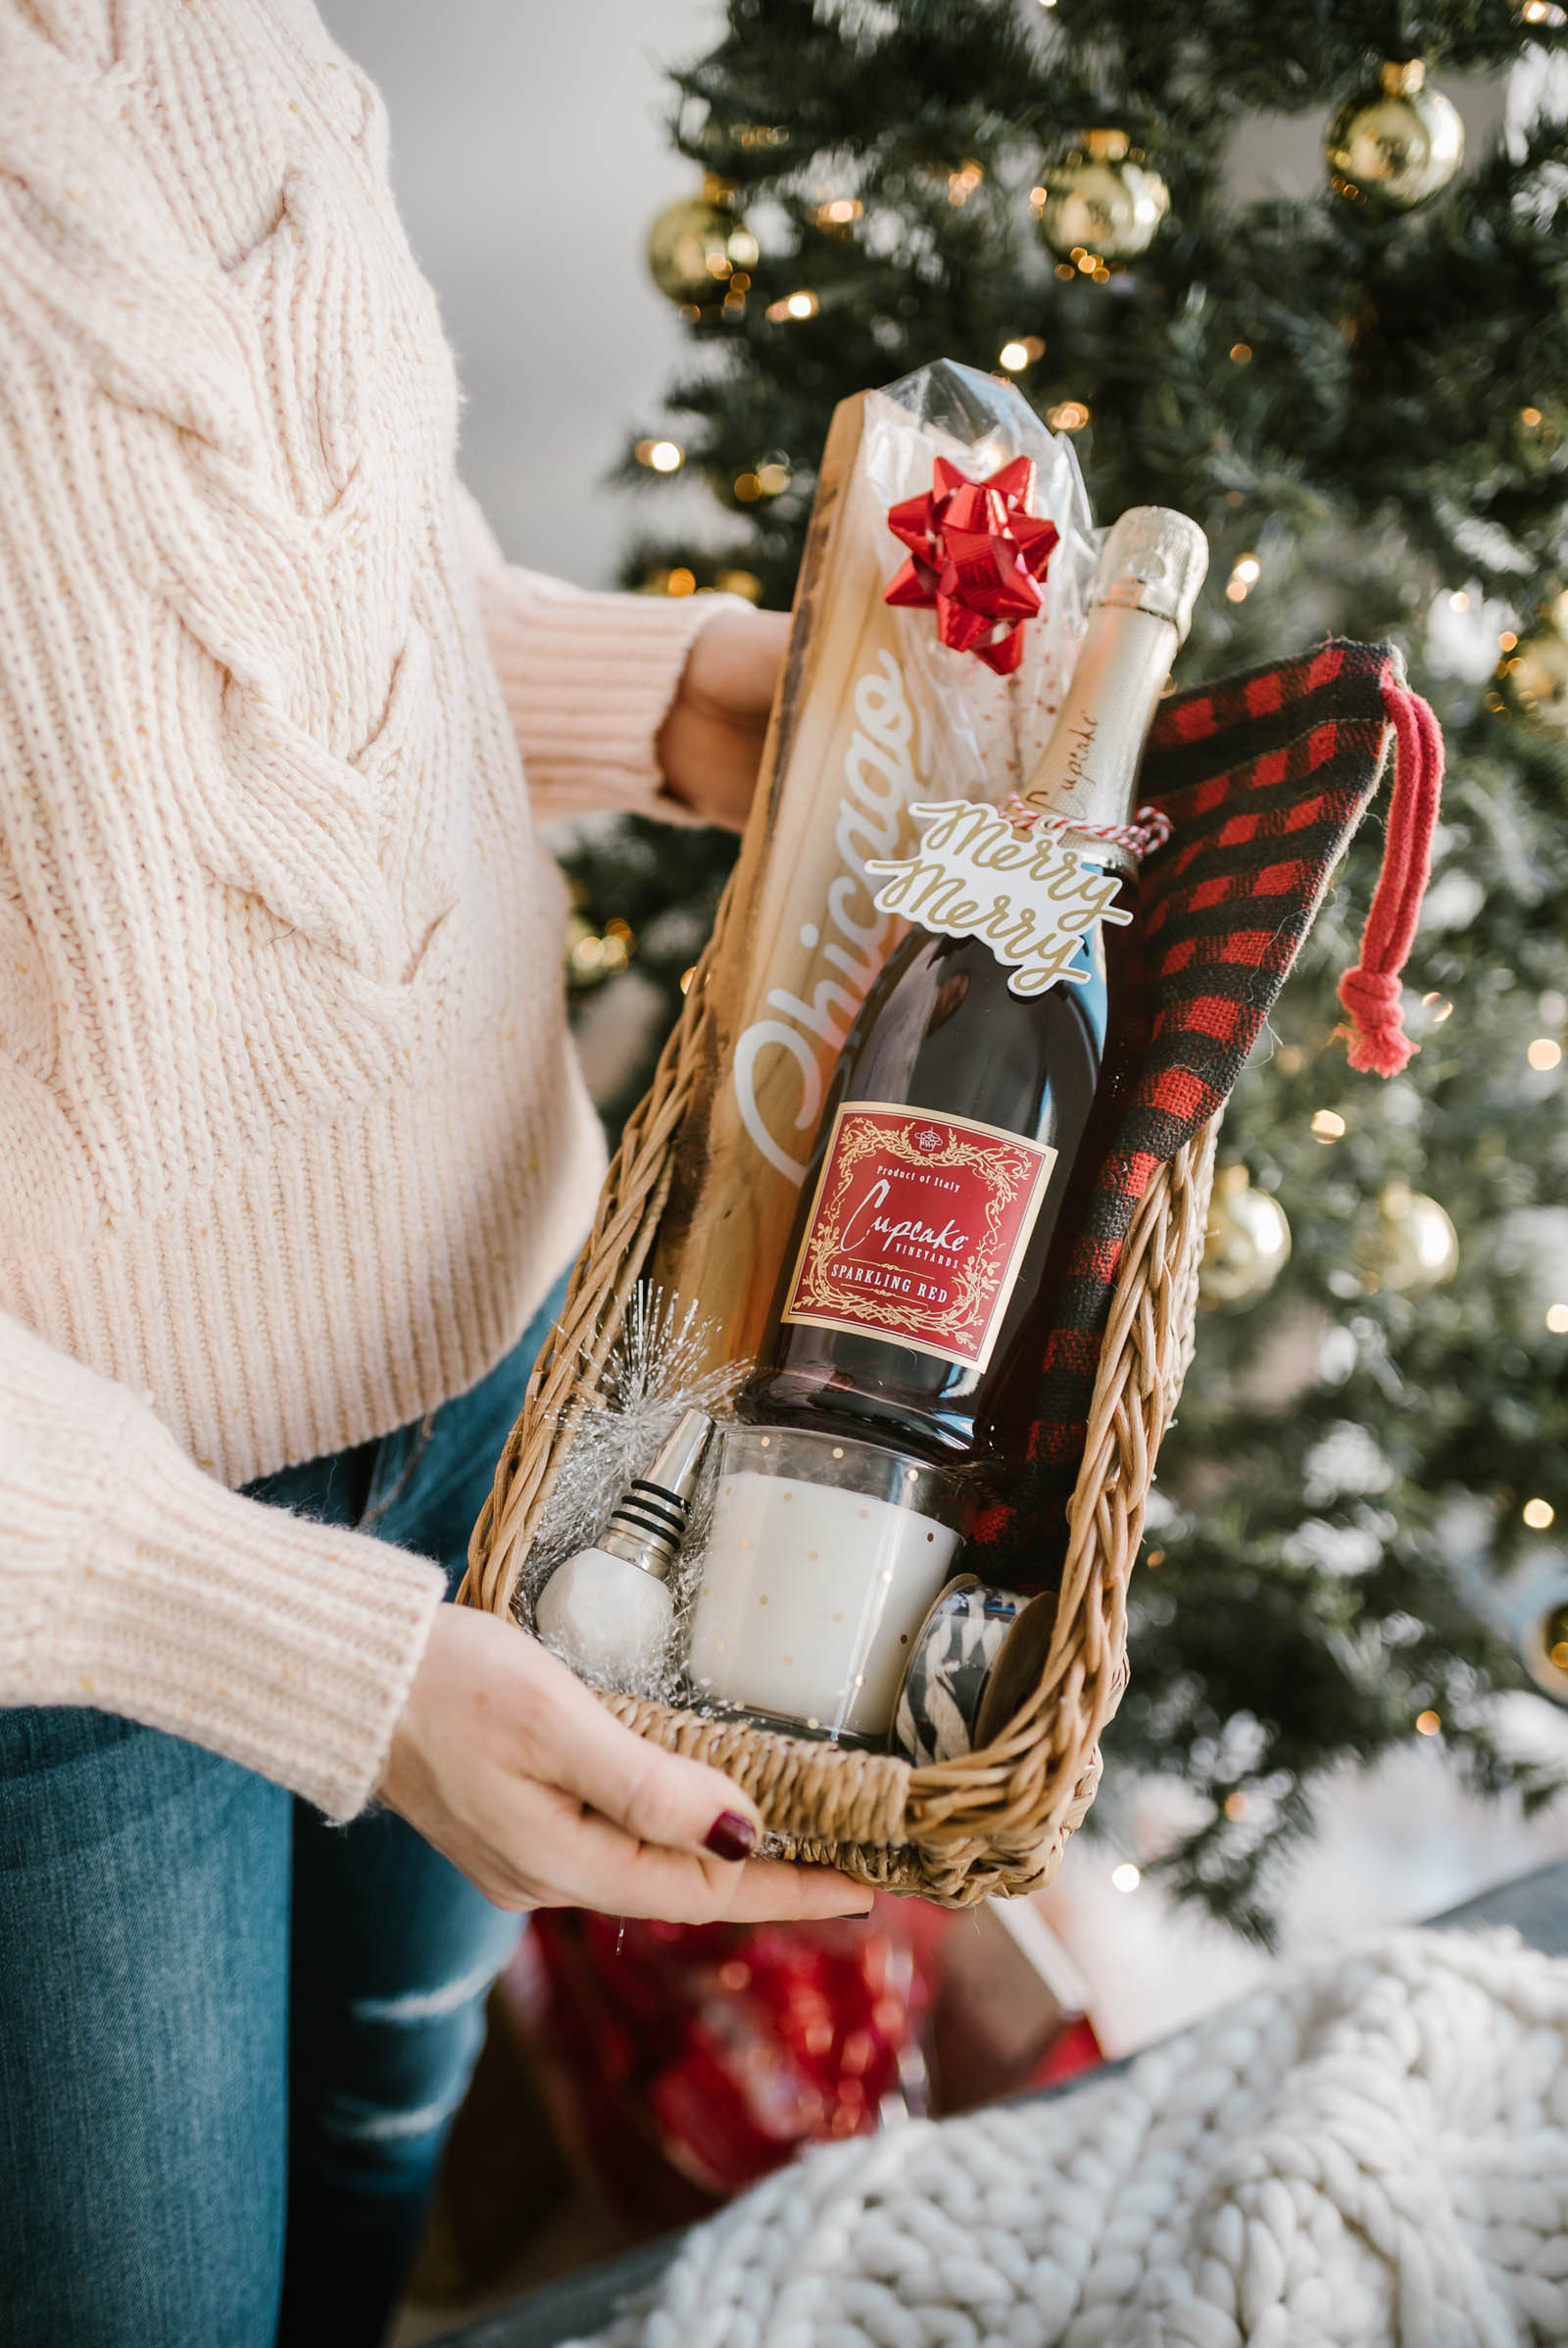 Personalized Gift Basket Ideas
 Last Minute Holiday Idea Easy Homemade Gift Baskets